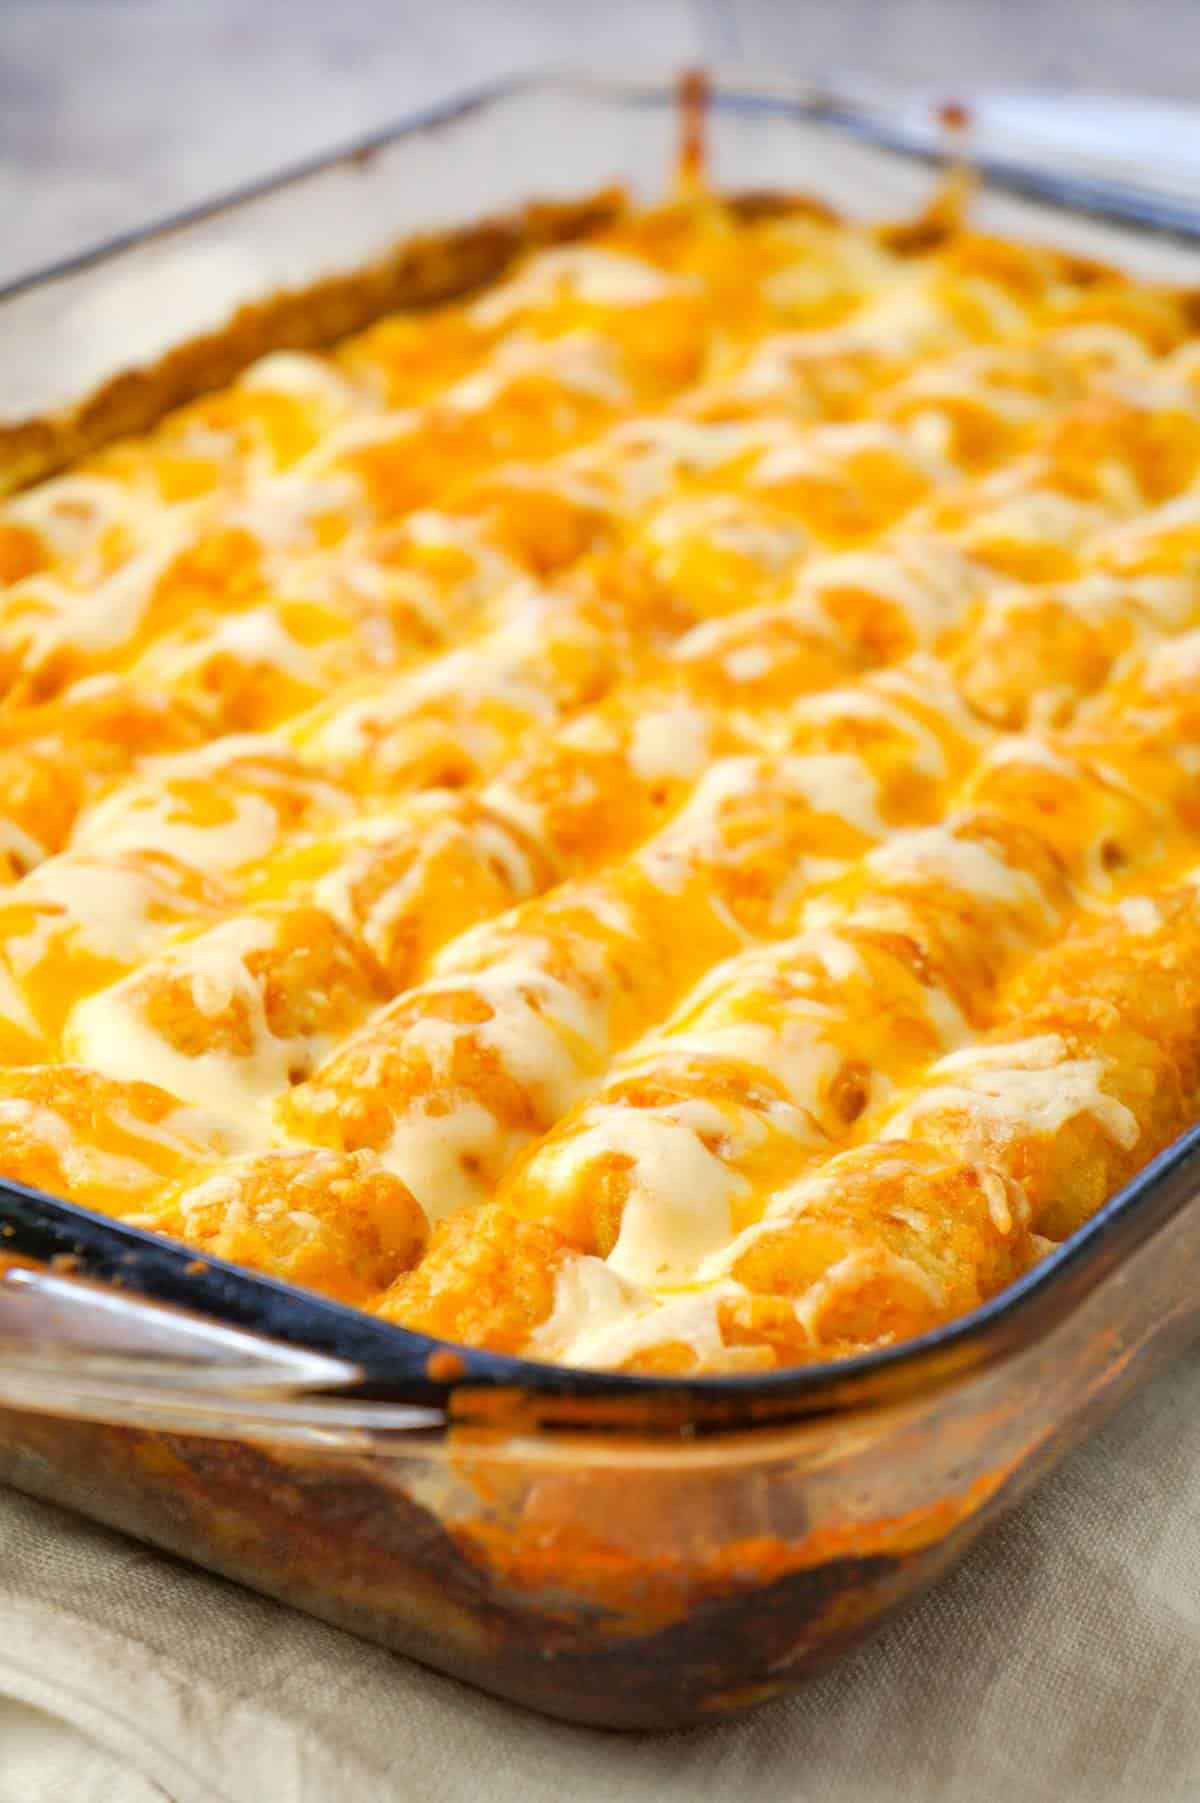 Shepherd's Pie Tater Tot Casserole is a hearty casserole with ground beef, corn and diced onions topped with mashed potatoes, tater tots and shredded cheese.